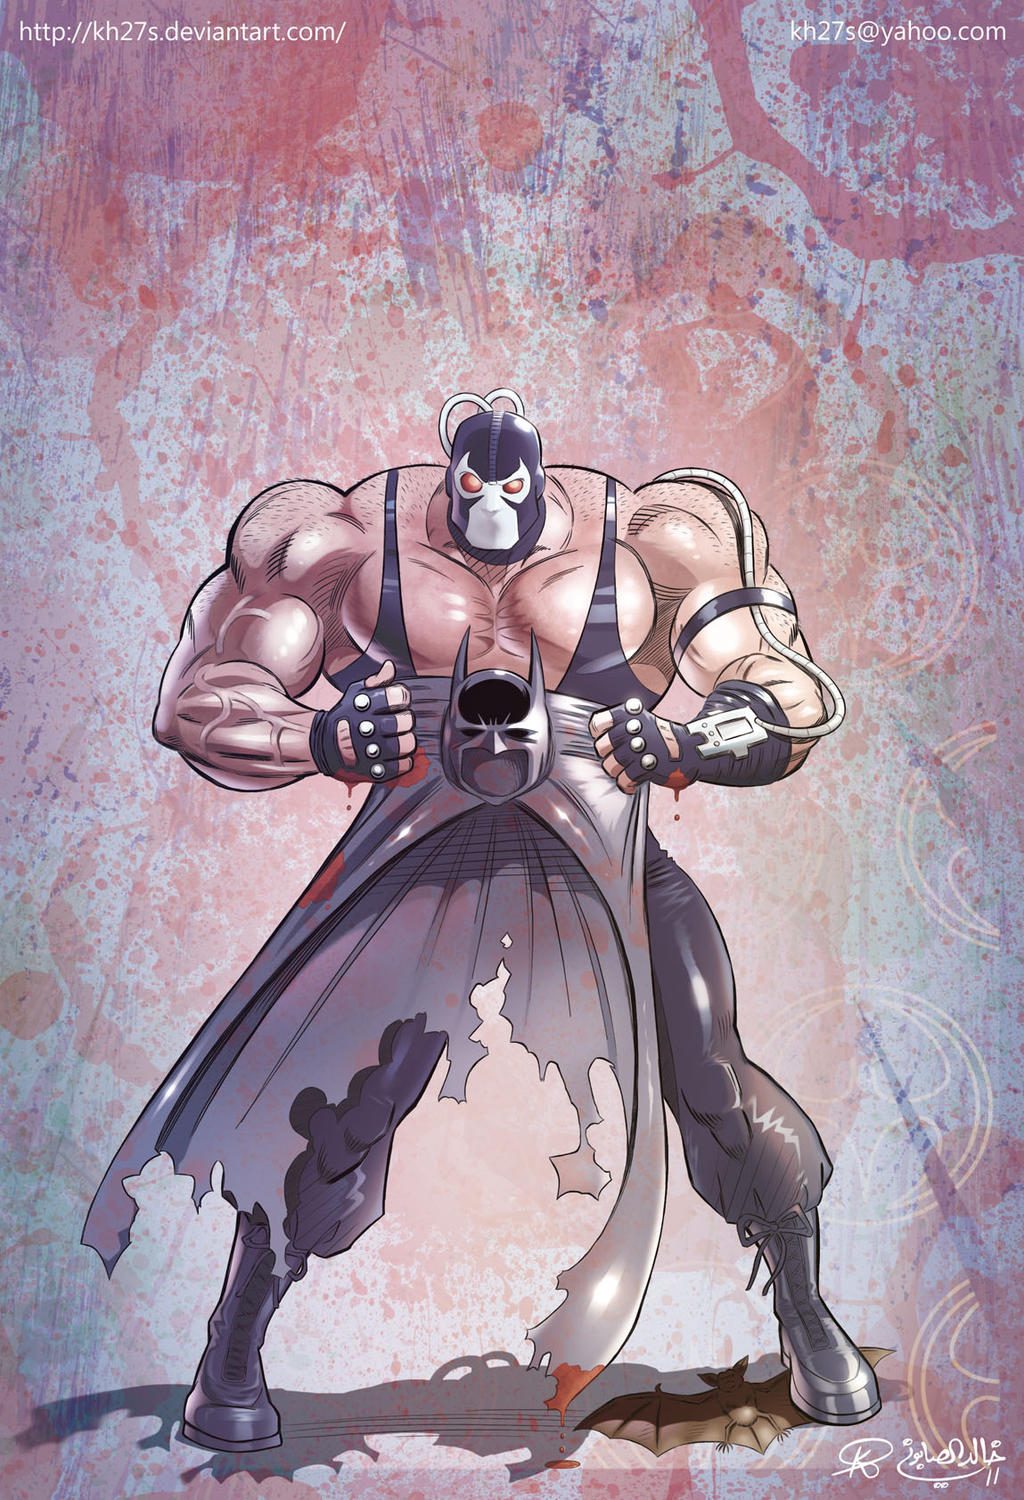 I AM YOUR BANE - Recolored -